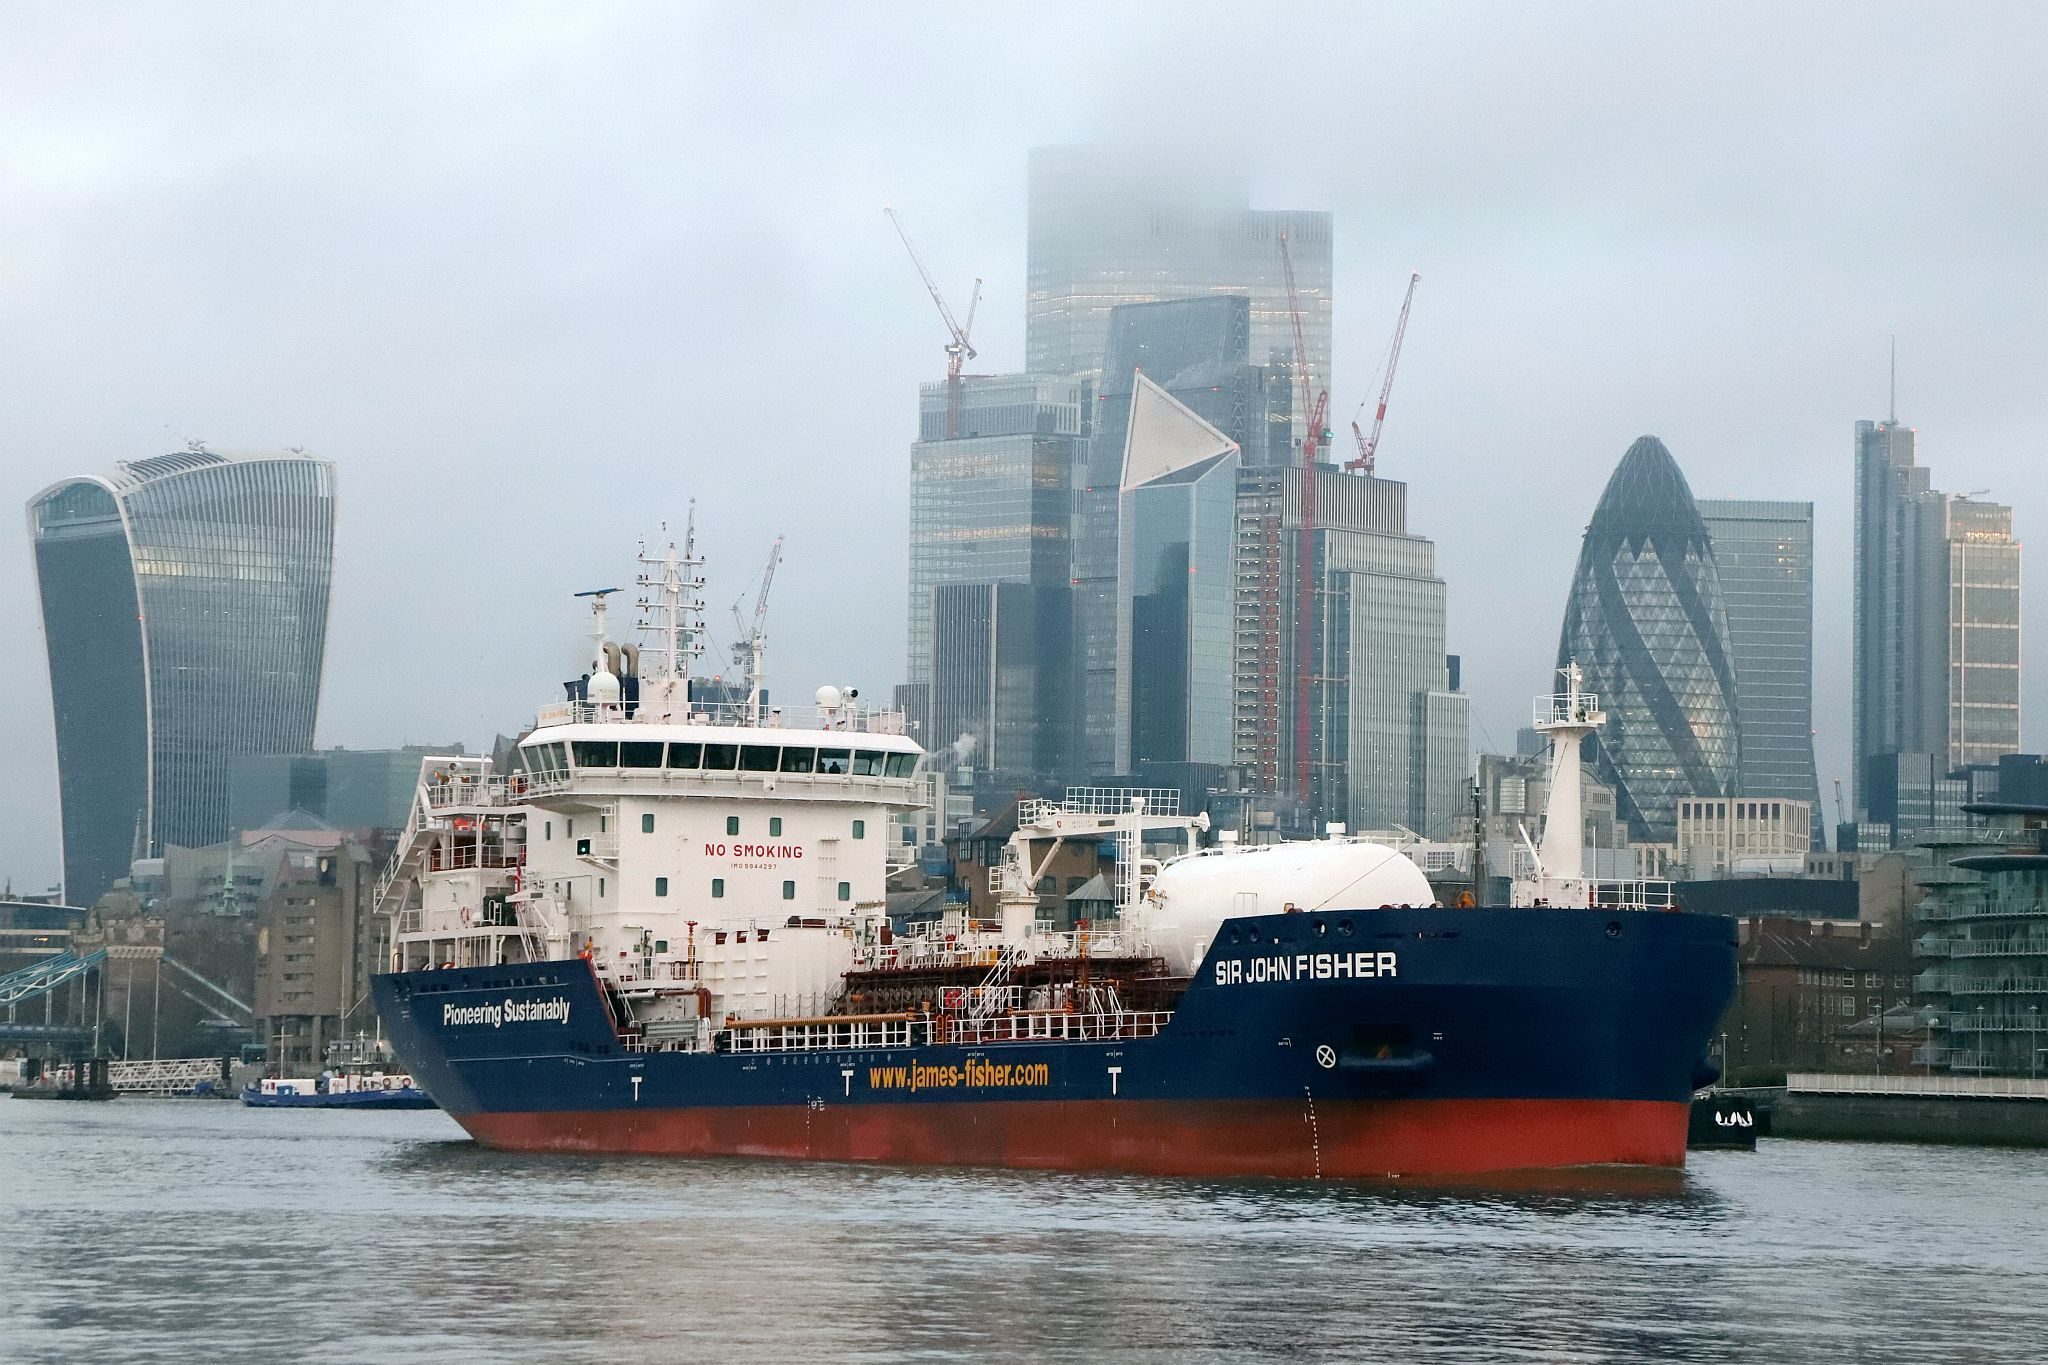 Chemical Tanker “Sir John Fisher”, owned by James Fisher, leaves central London on 29-Mar-2023 and passes downstream on the River Thames with the City of London in the background.